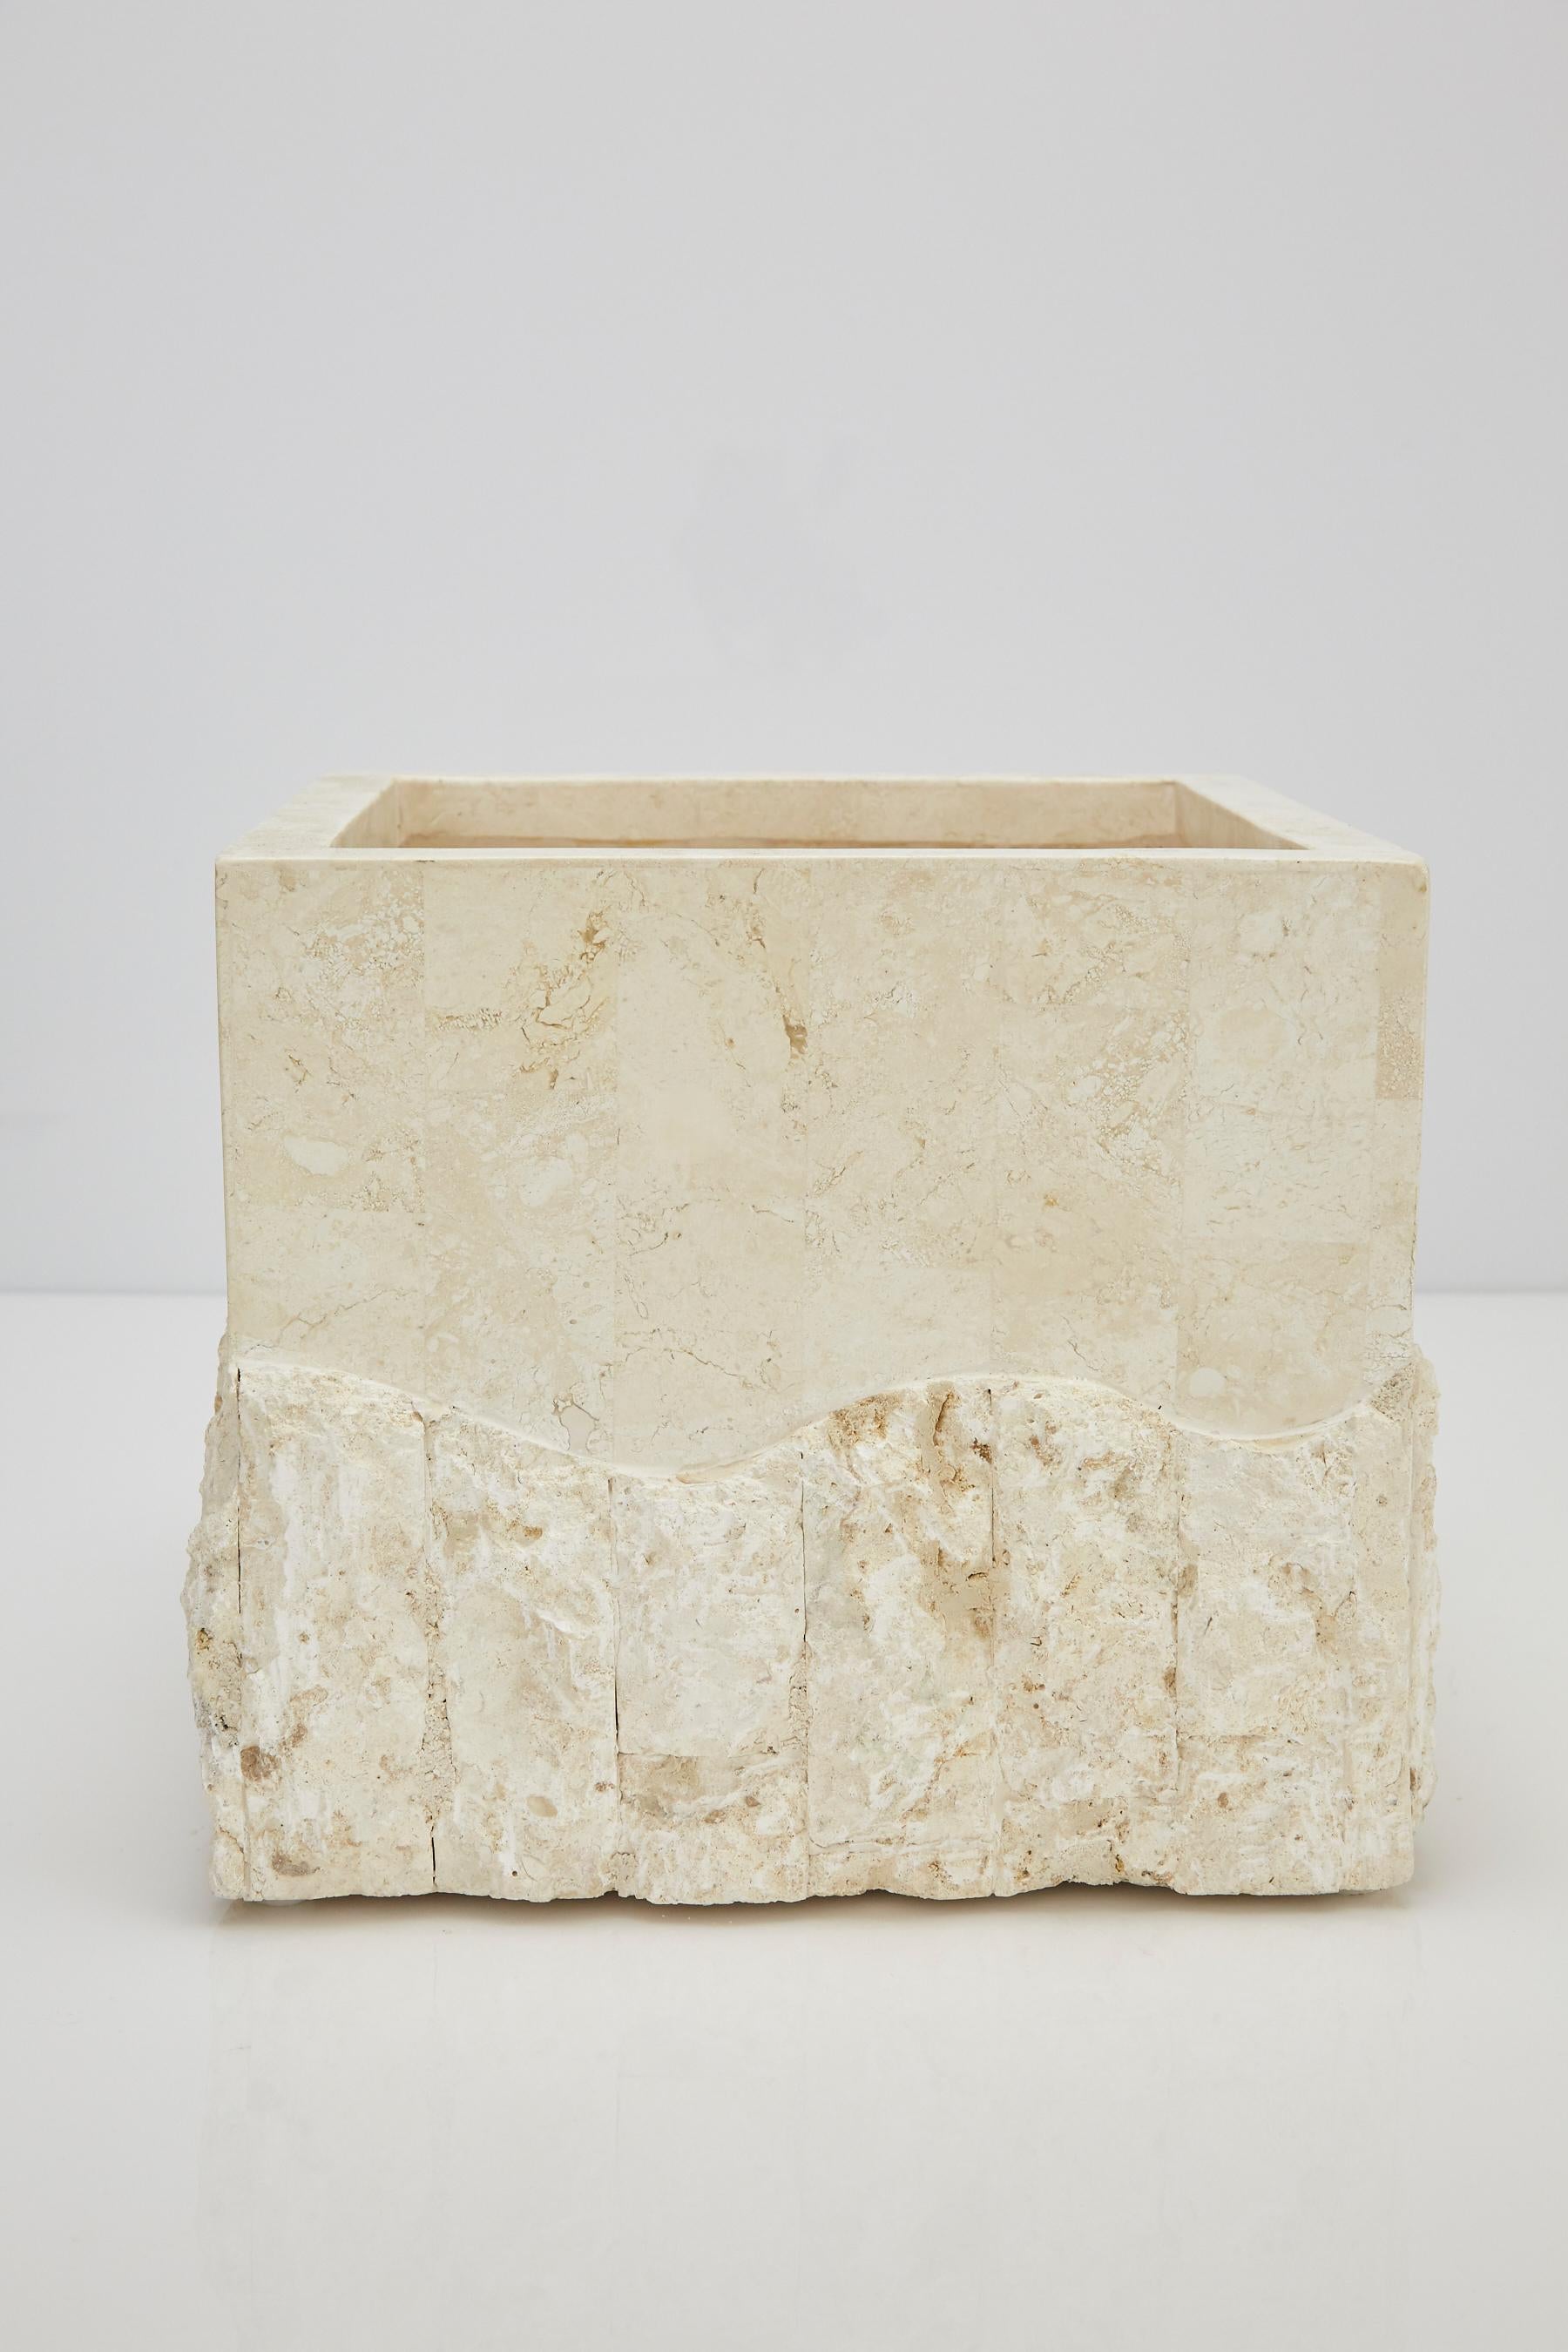 Philippine Medium Tessellated White Stone Square Rough and Smooth Planter, 1990s For Sale